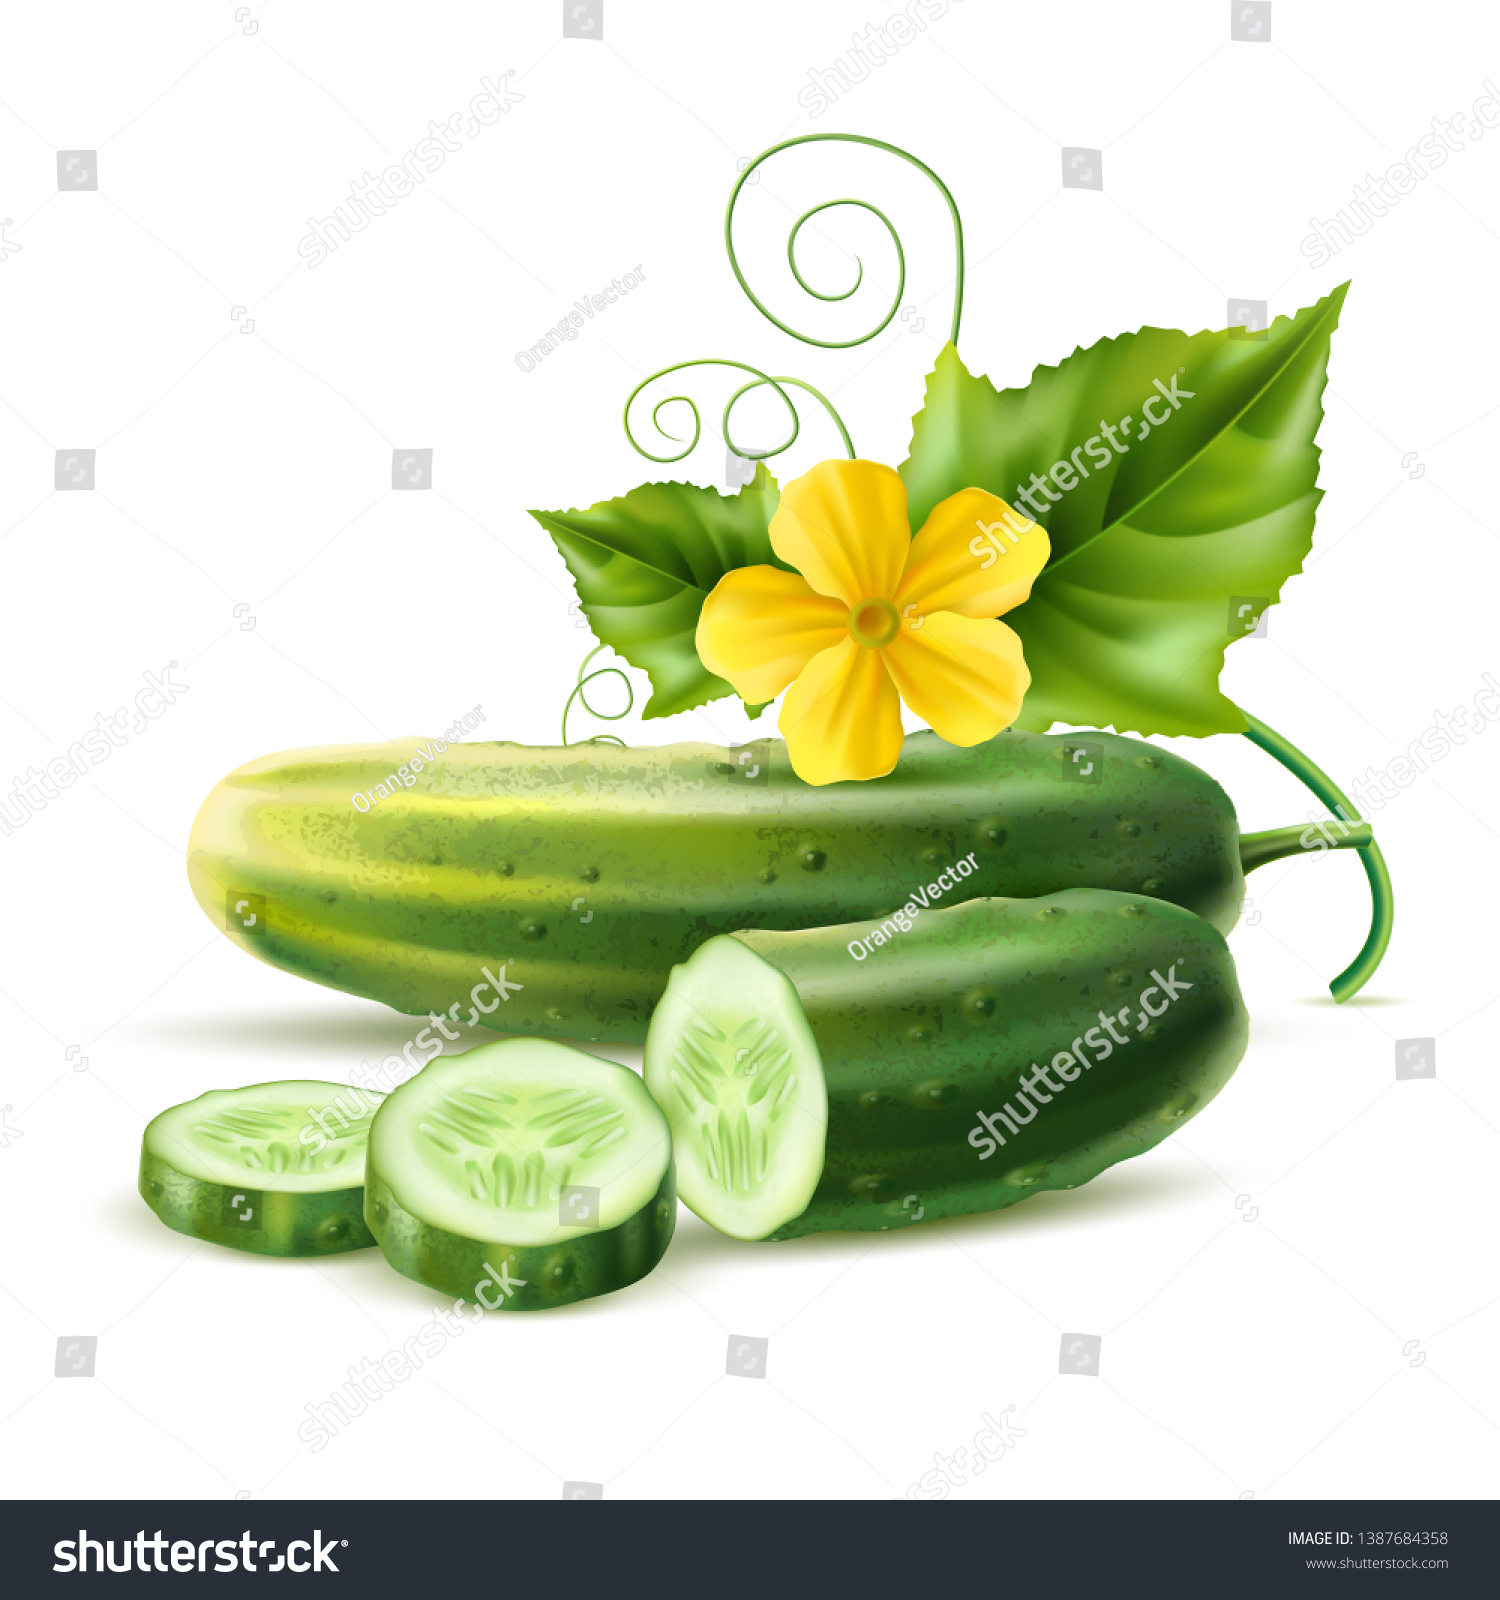 Realistic cucumber with green stem leaves and flower. Vector organic vegetable package design element. Healthy fresh cucumber slices with haulm. Agricultural product, seeds design. #1387684358